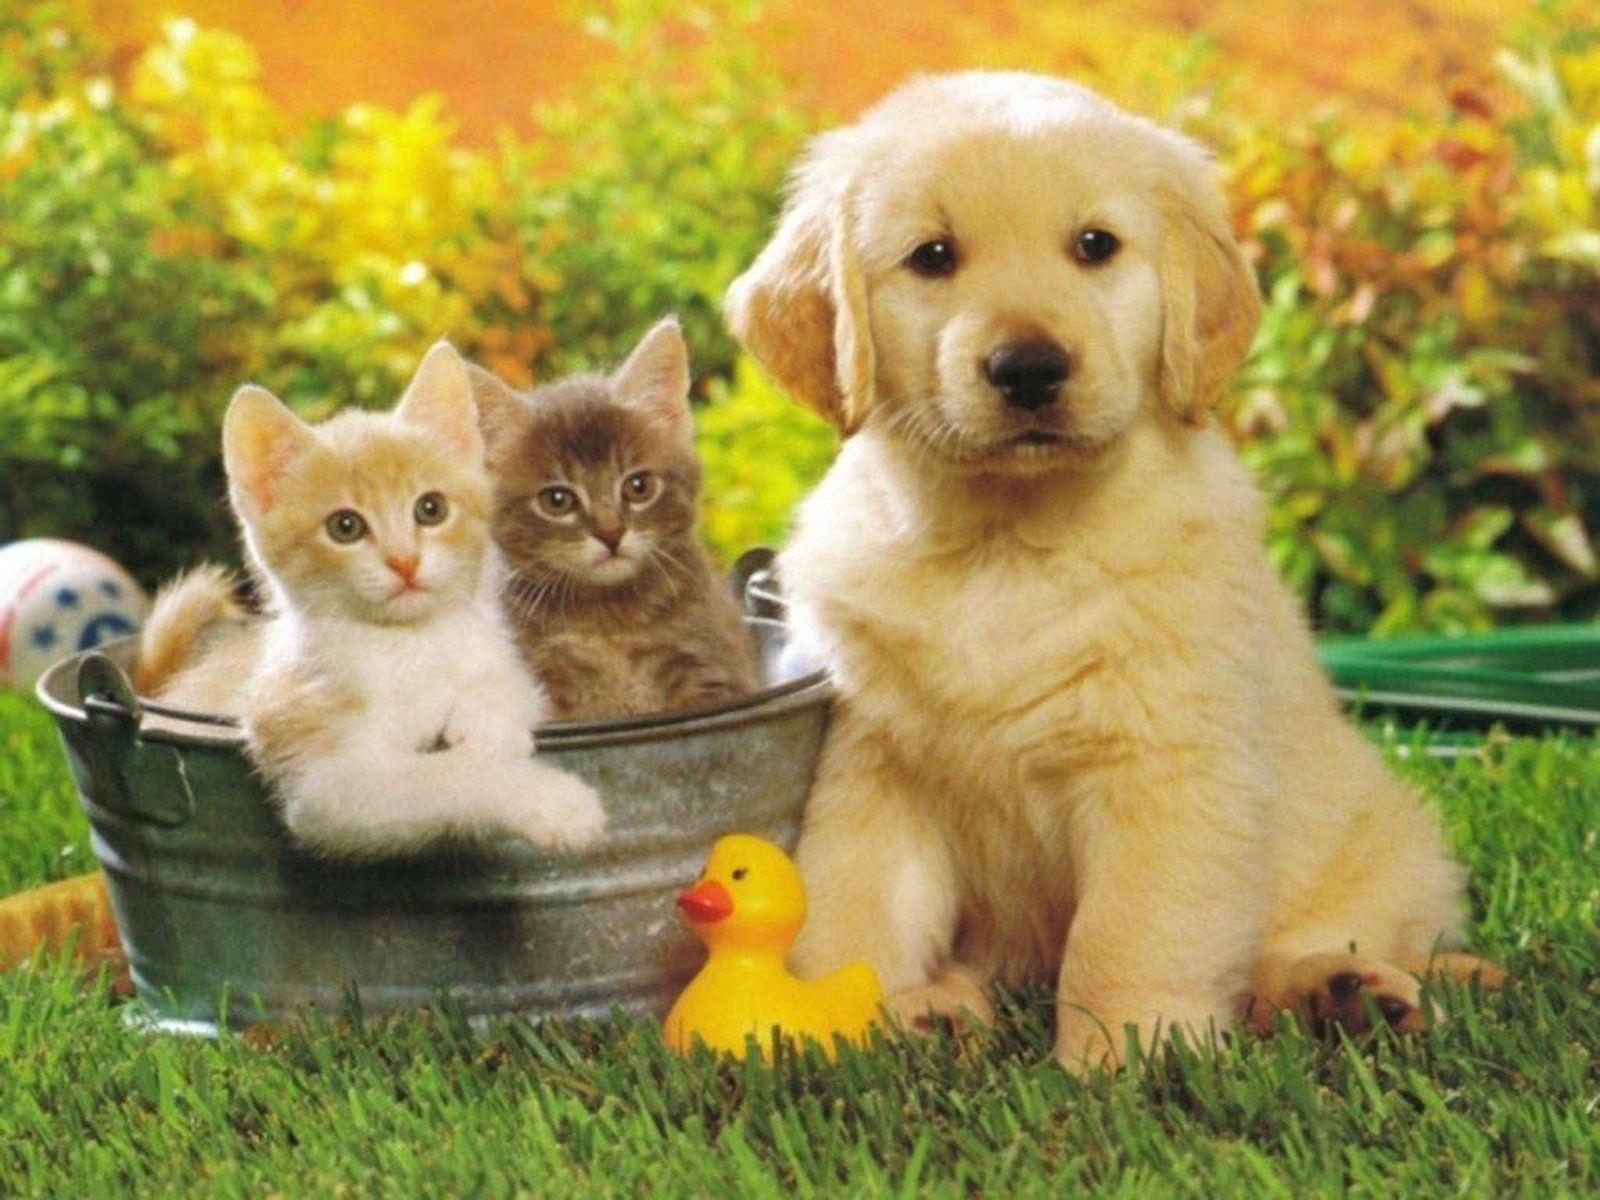 puppies and kittens wallpapers - wallpaper cave